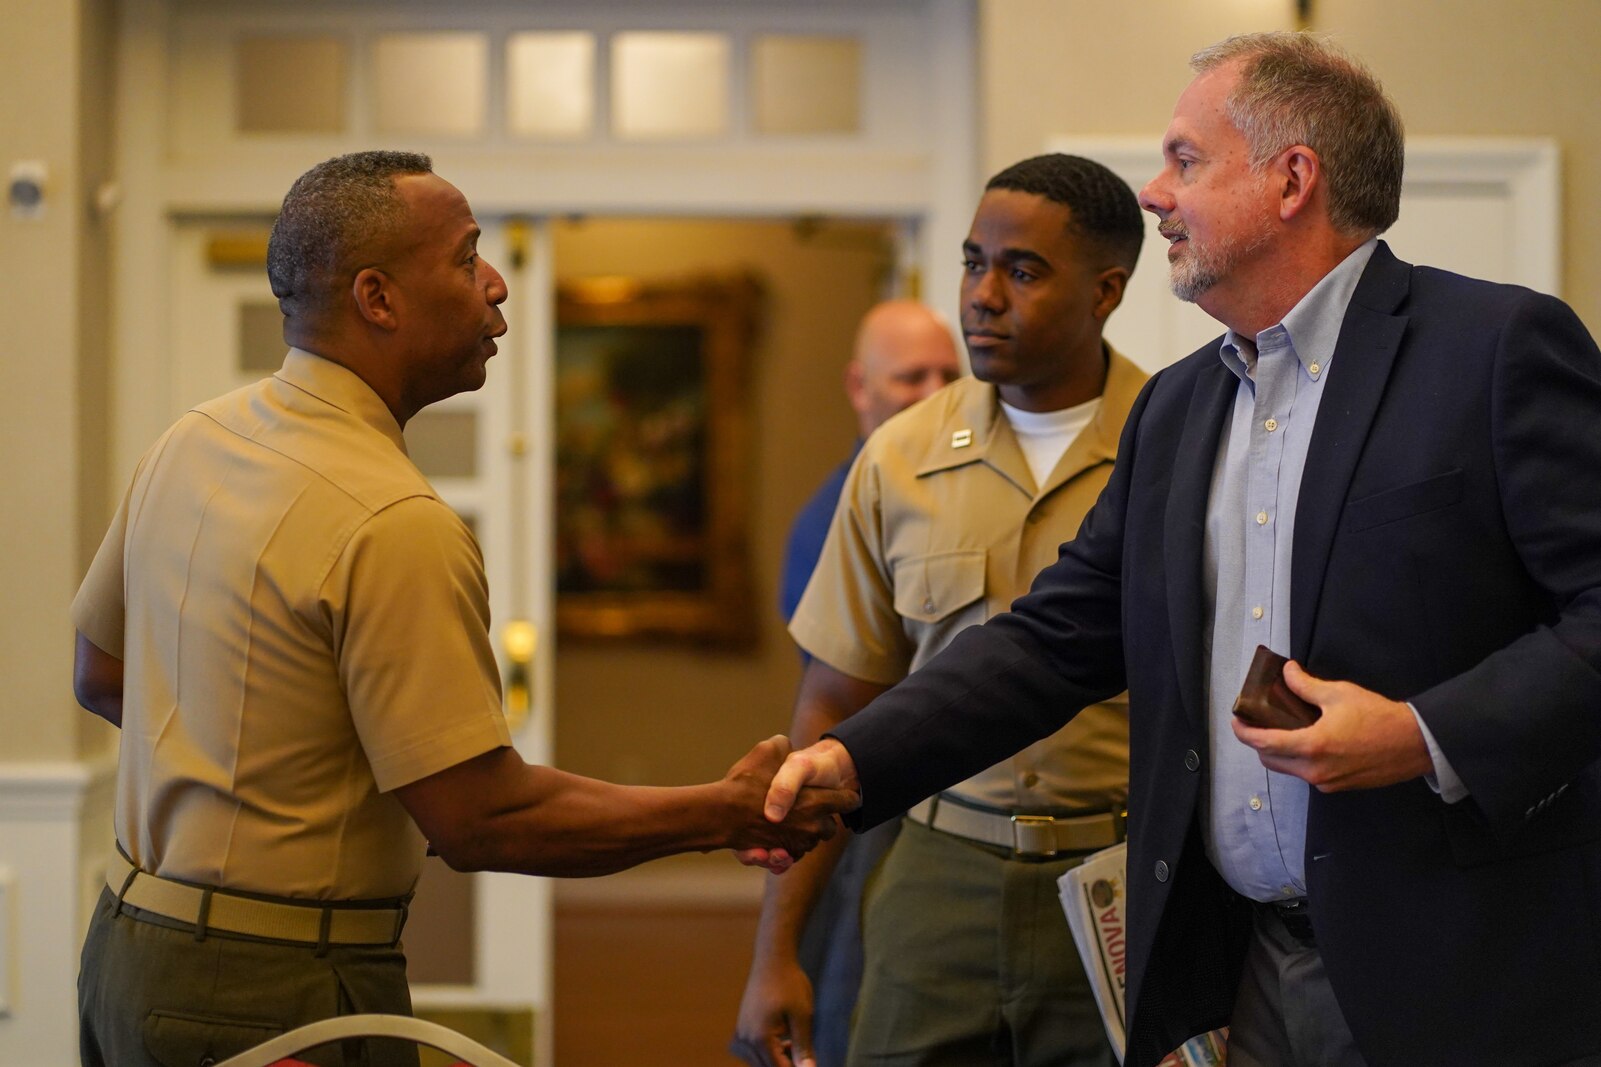 U.S. Marine Corps Col. Michael L. Brooks, left, base commander, Marine Corps Base Quantico, shakes hands with Bruce Potter, right, publisher of InsideNoVa, at the MCBQ media roundtable at The Clubs at Quantico and Crossroads Event Center on Marine Corps Base Quantico, Virginia, Sept. 28, 2022. The media roundtable allowed local journalists an opportunity to meet with Brooks, ask questions, and discuss MCBQ’s role and partnerships in the surrounding community. (U.S. Marine Corps photo by Cpl. Eric Huynh)